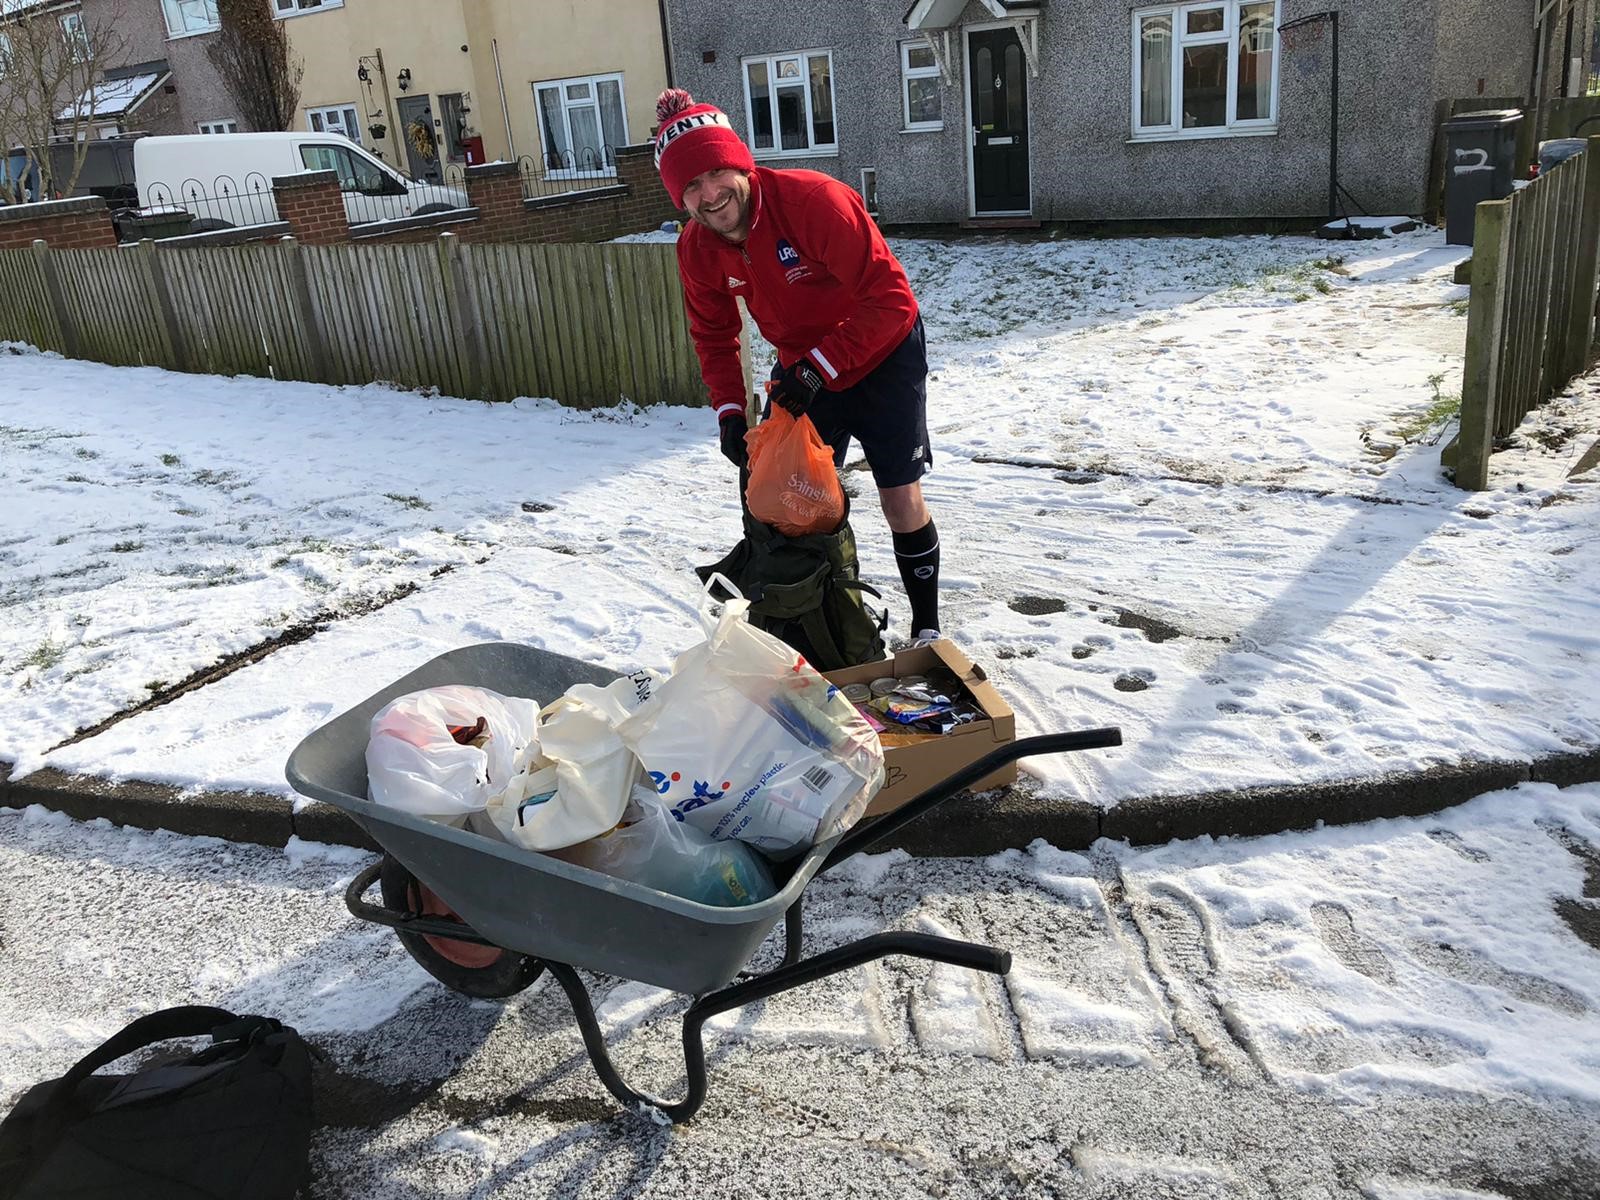 Geoff collecting food parcels in a wheelbarrow in the snow